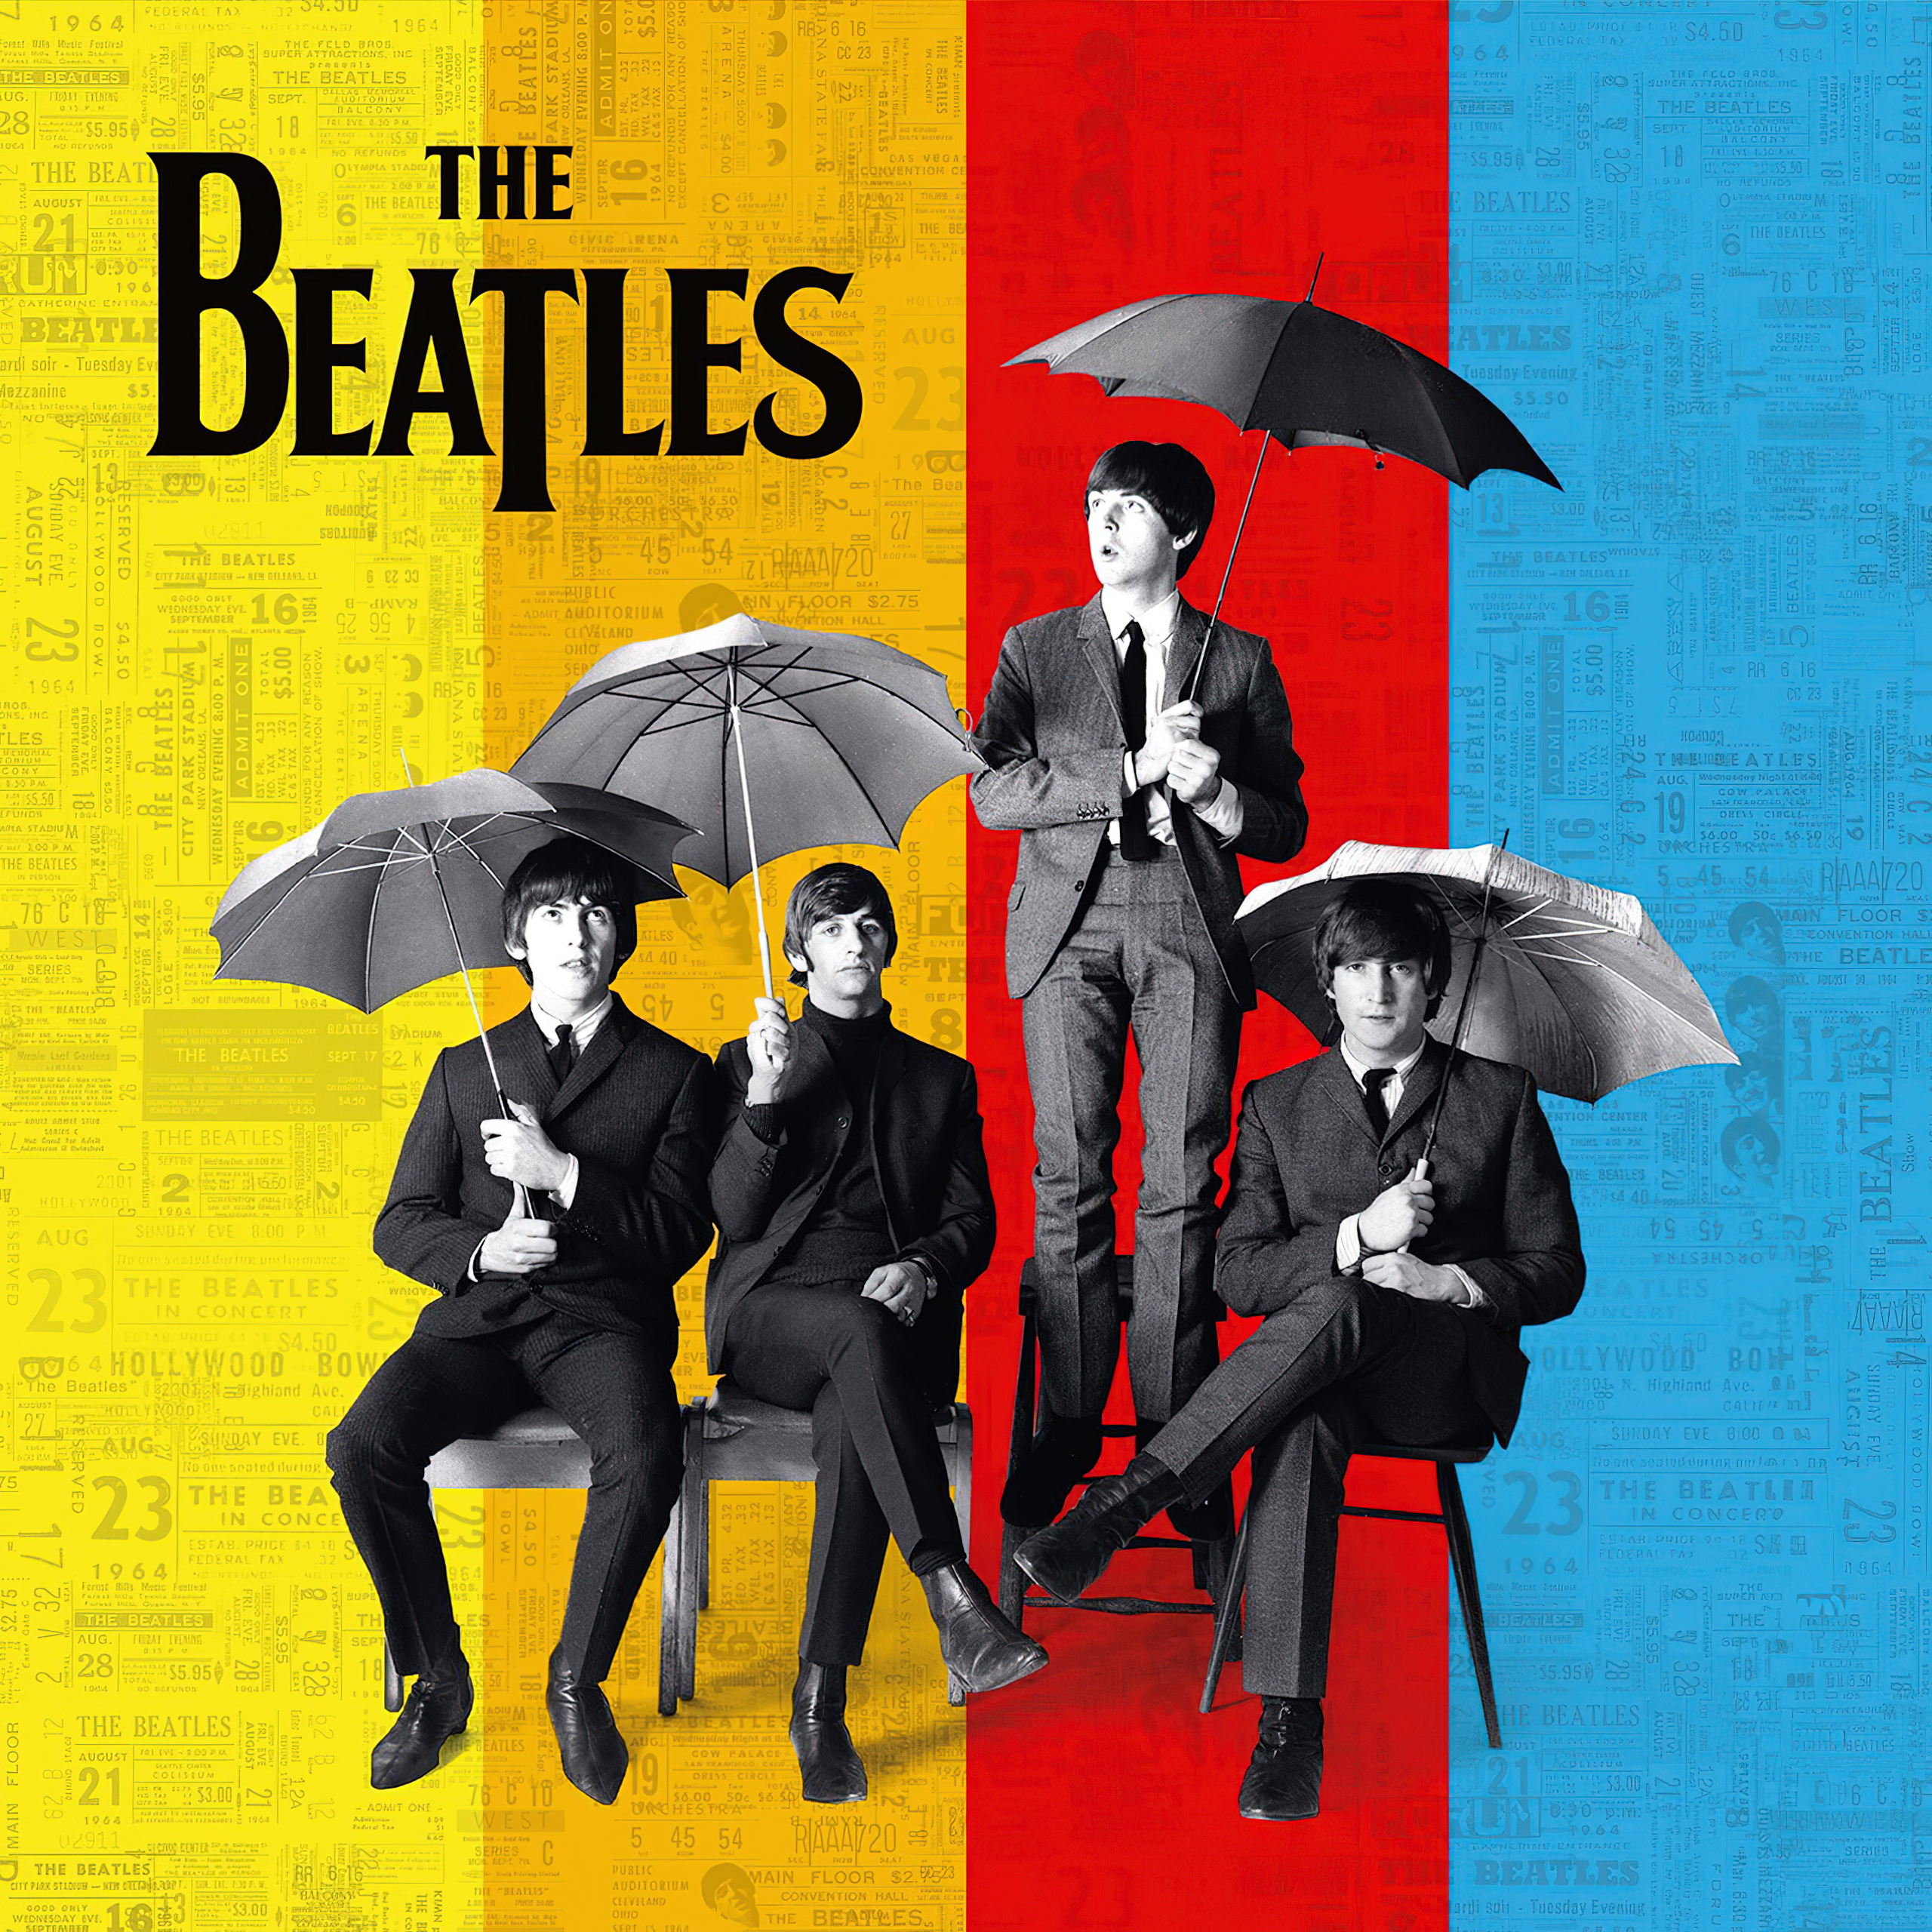 The Fab Four Favorites: Songs 54-35